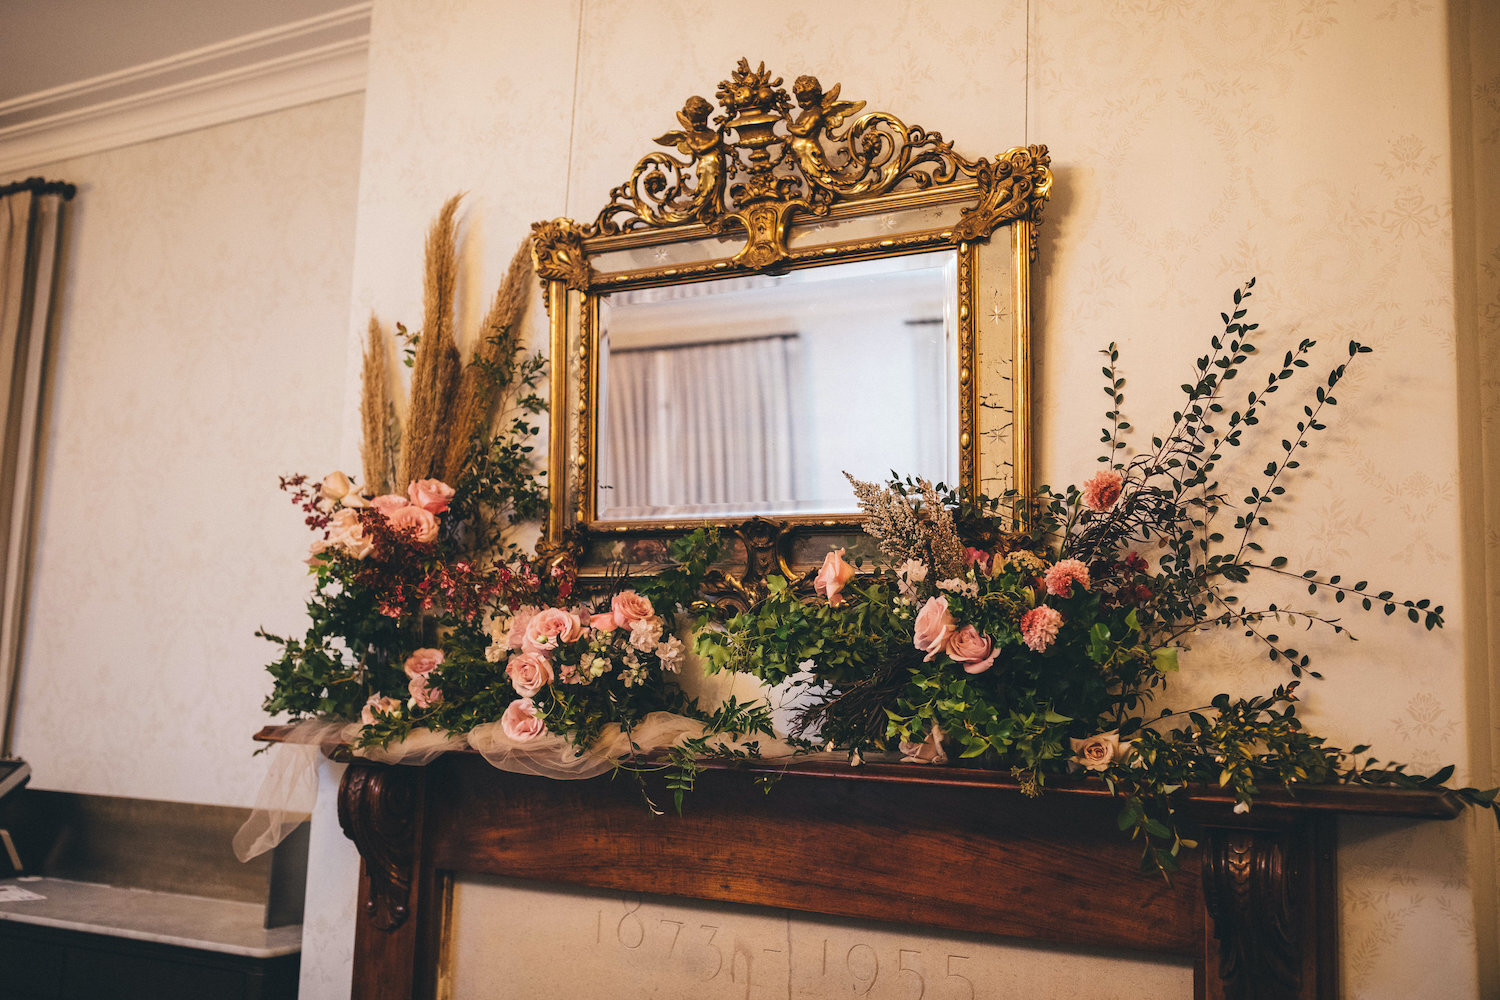 mantlepiece and mirror with floral decor gunners barracks